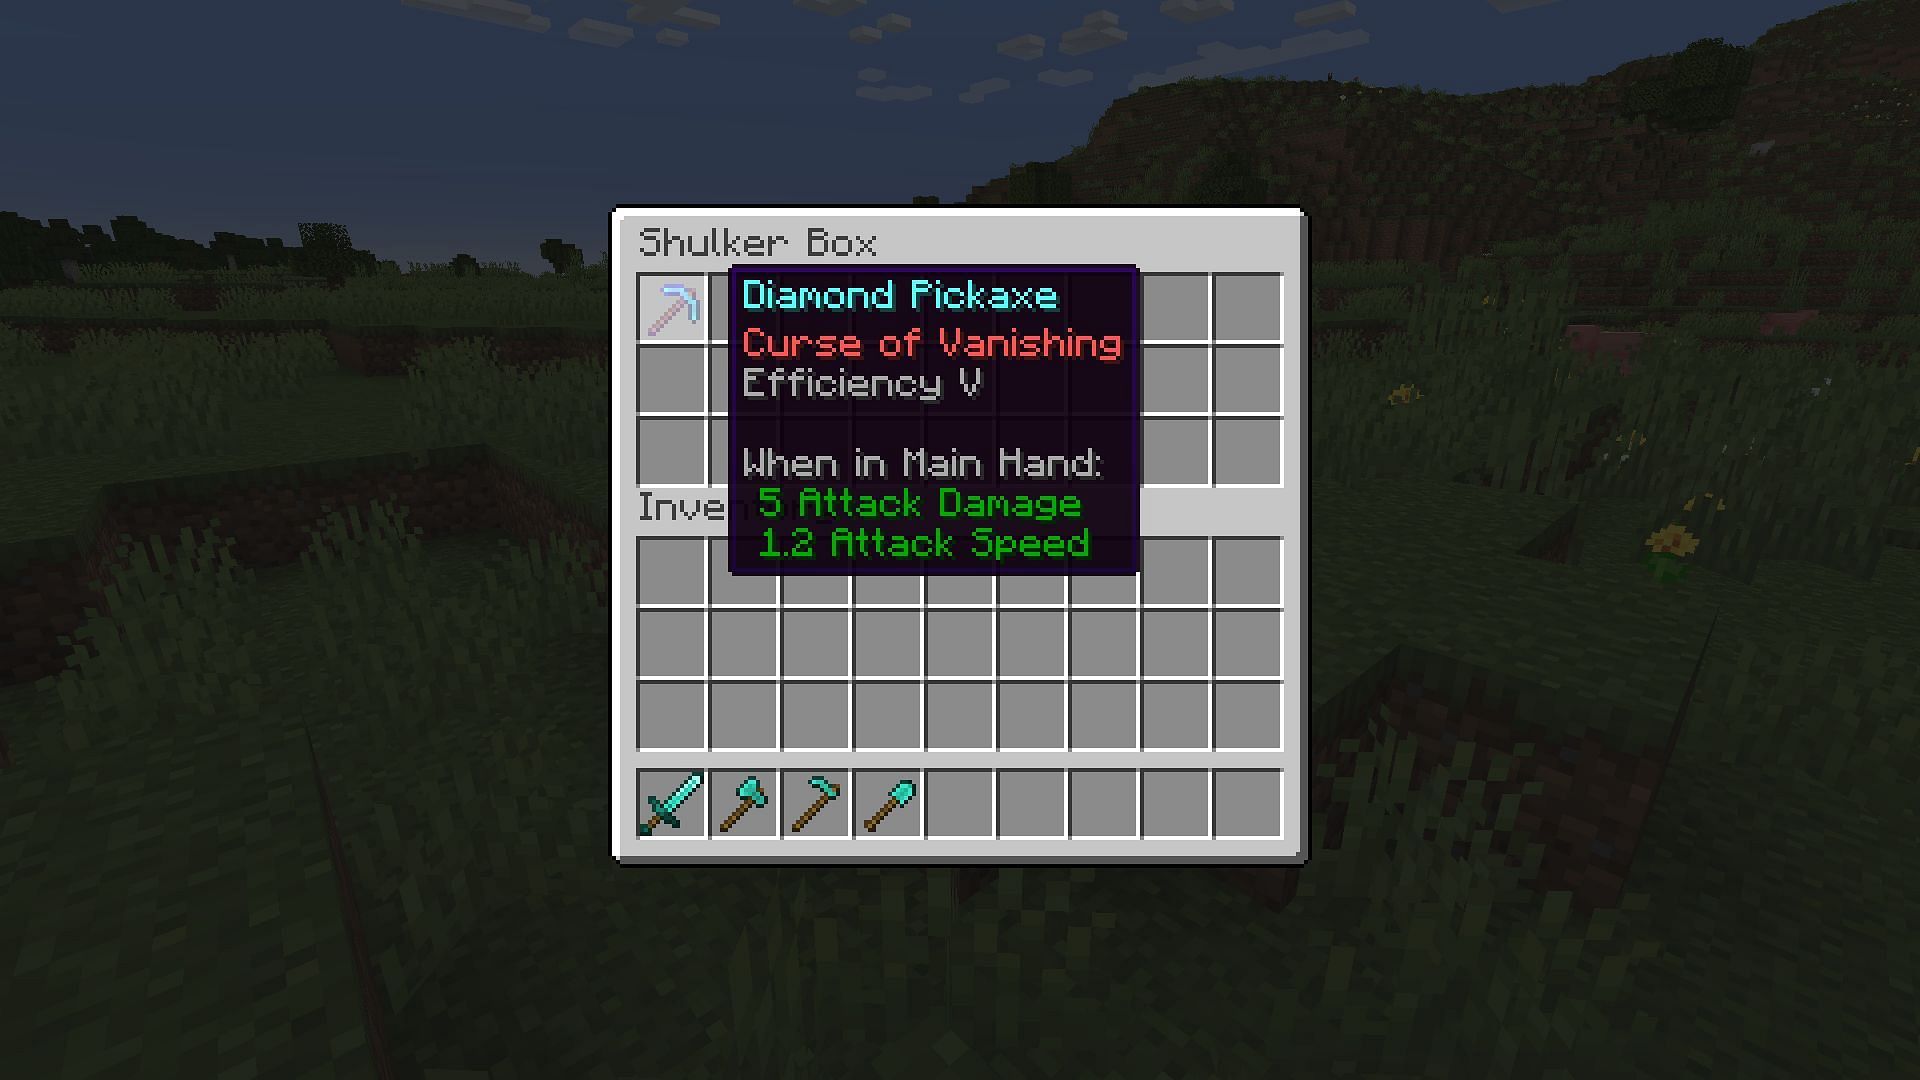 Placing a cures of vanishing tool in a shulker box to protect it (Image via Minecraft)